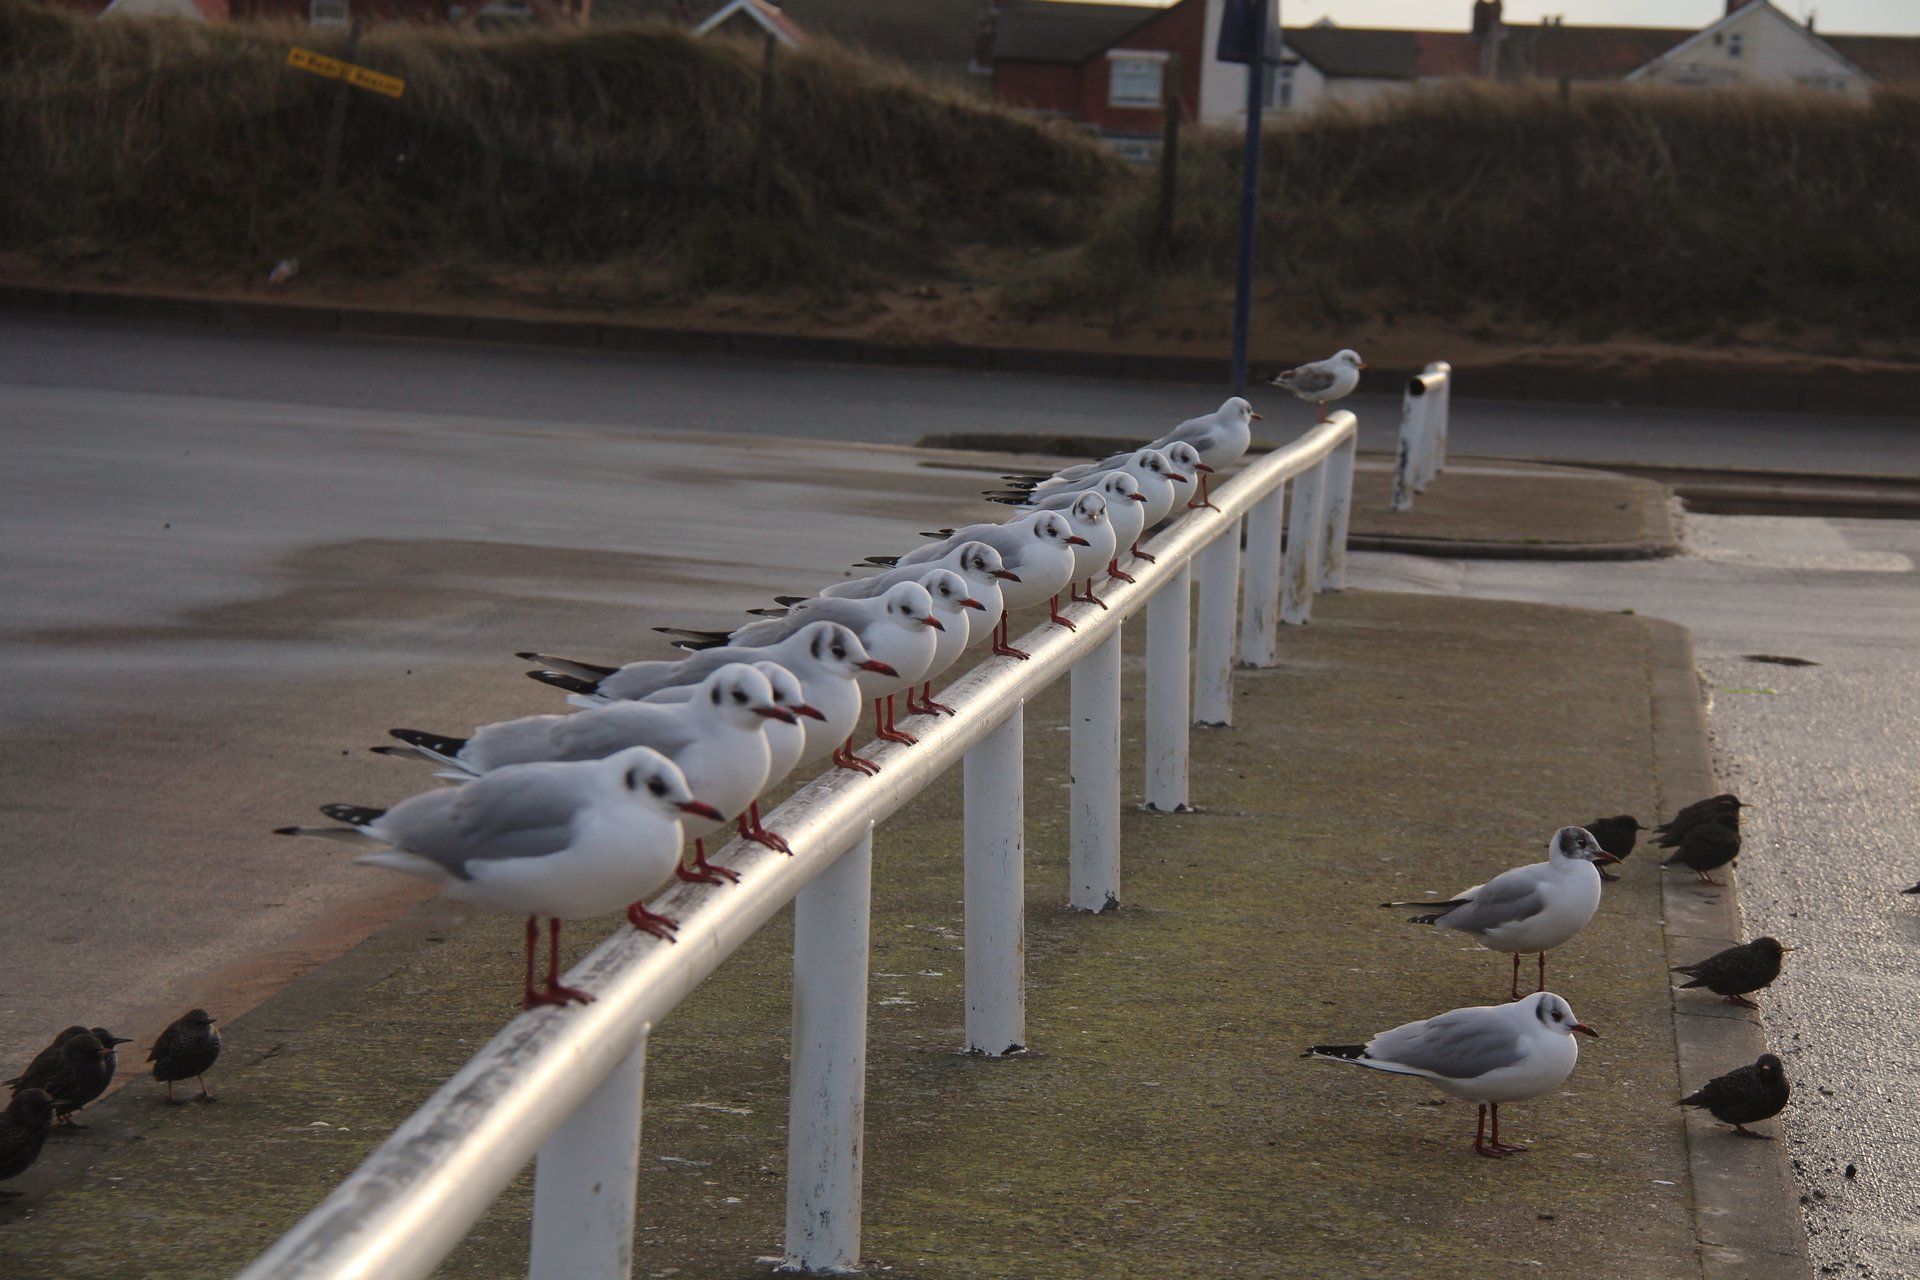 Seagulls on the beach at Redcar